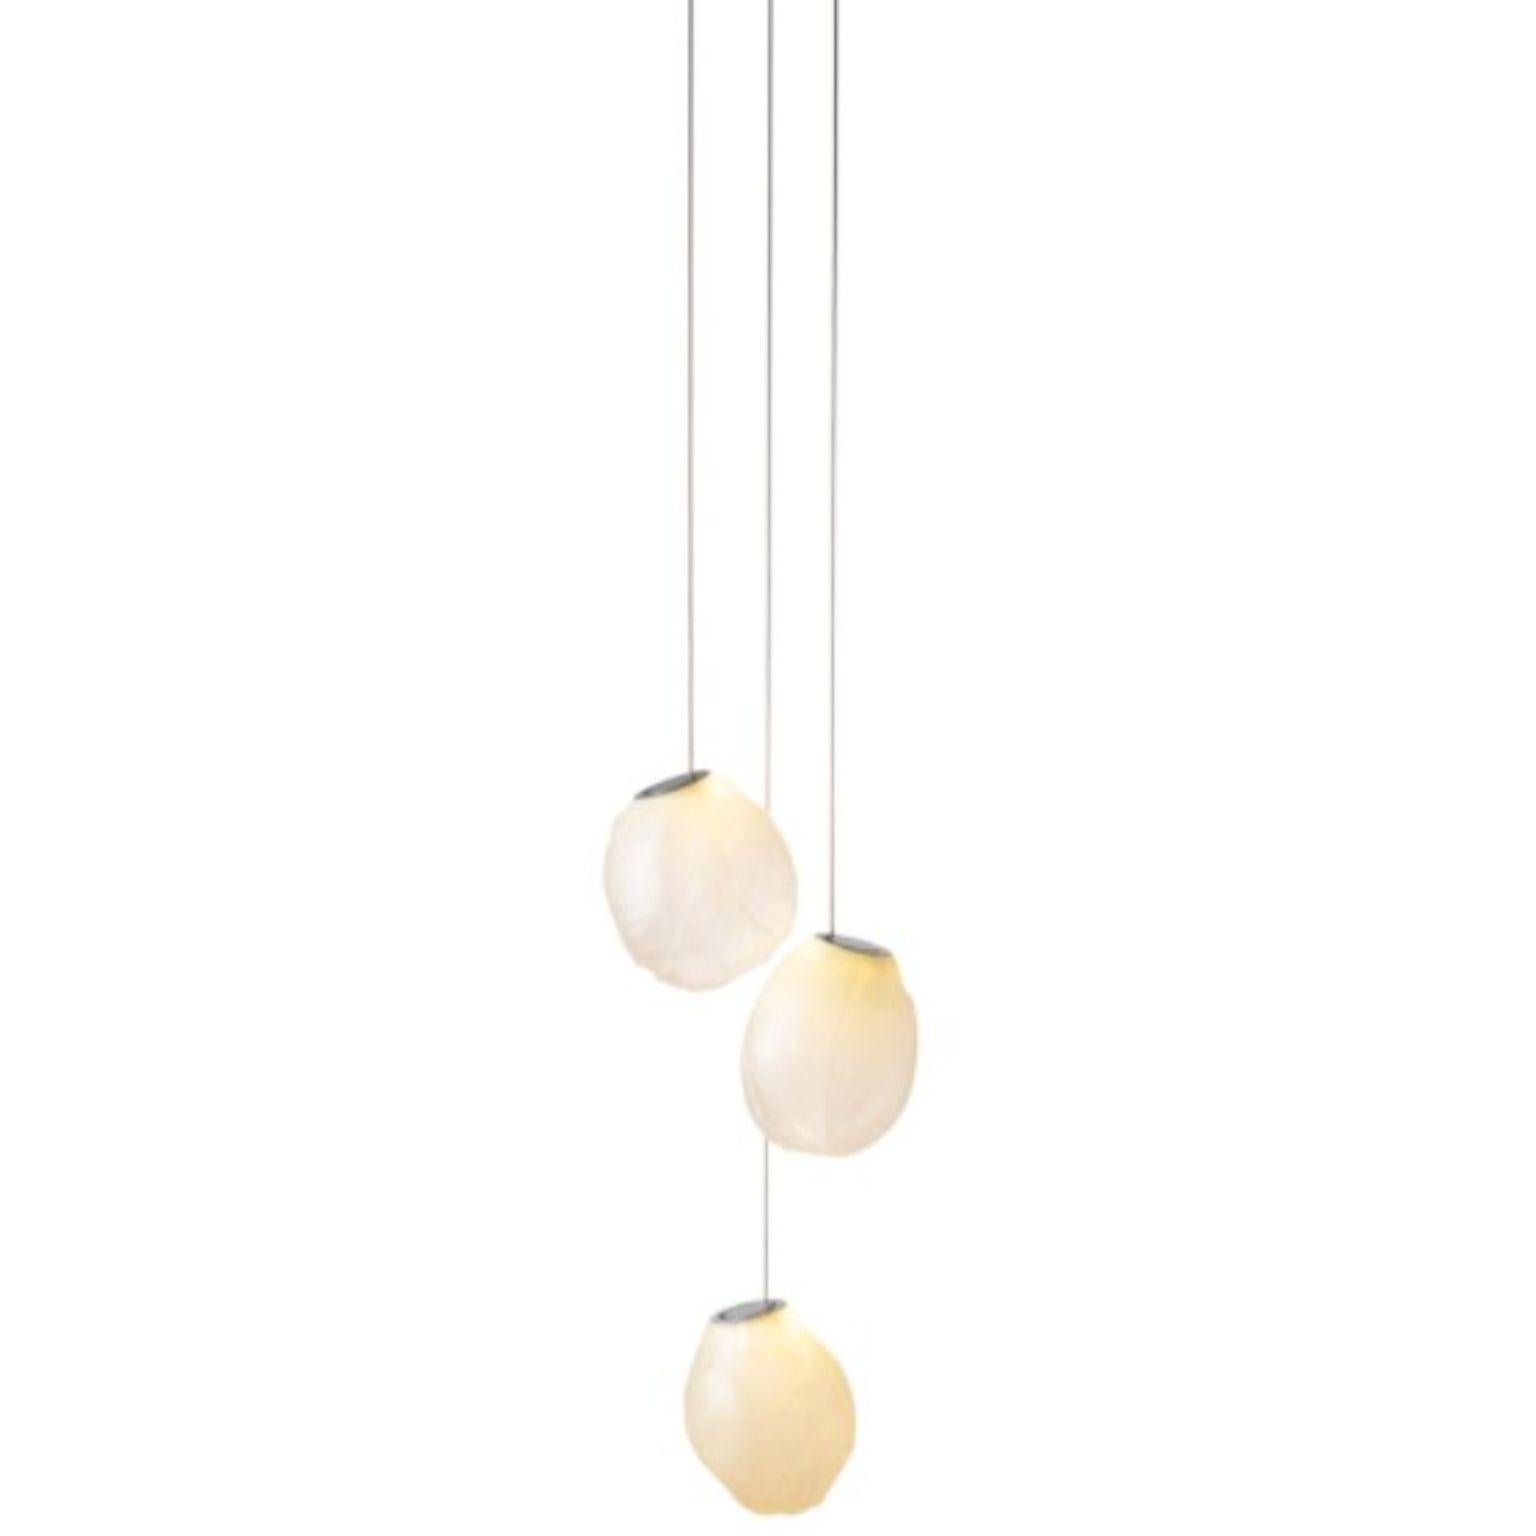 Other 73.3 Pendant by Bocci